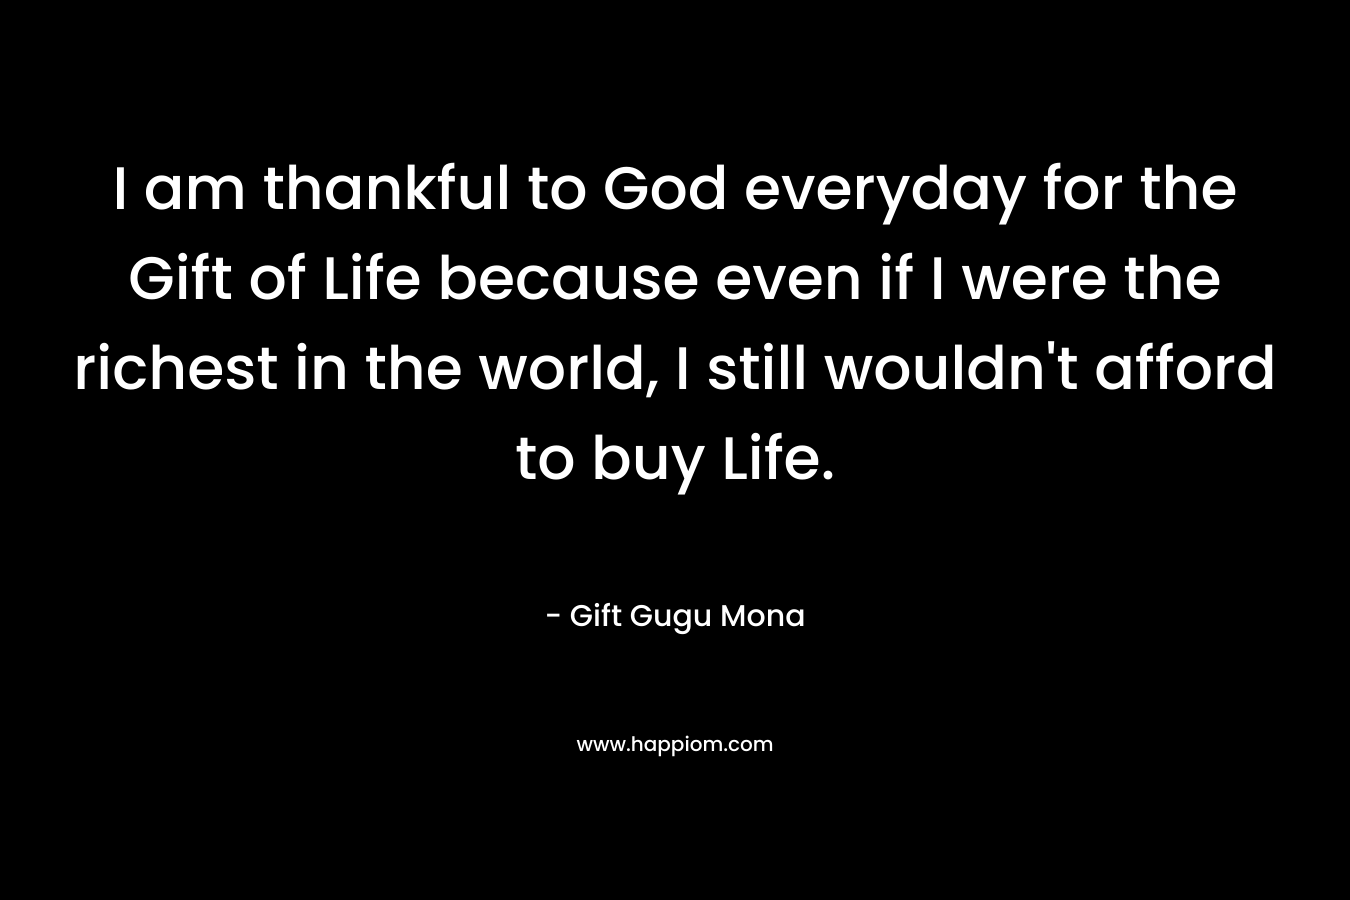 I am thankful to God everyday for the Gift of Life because even if I were the richest in the world, I still wouldn’t afford to buy Life. – Gift Gugu Mona